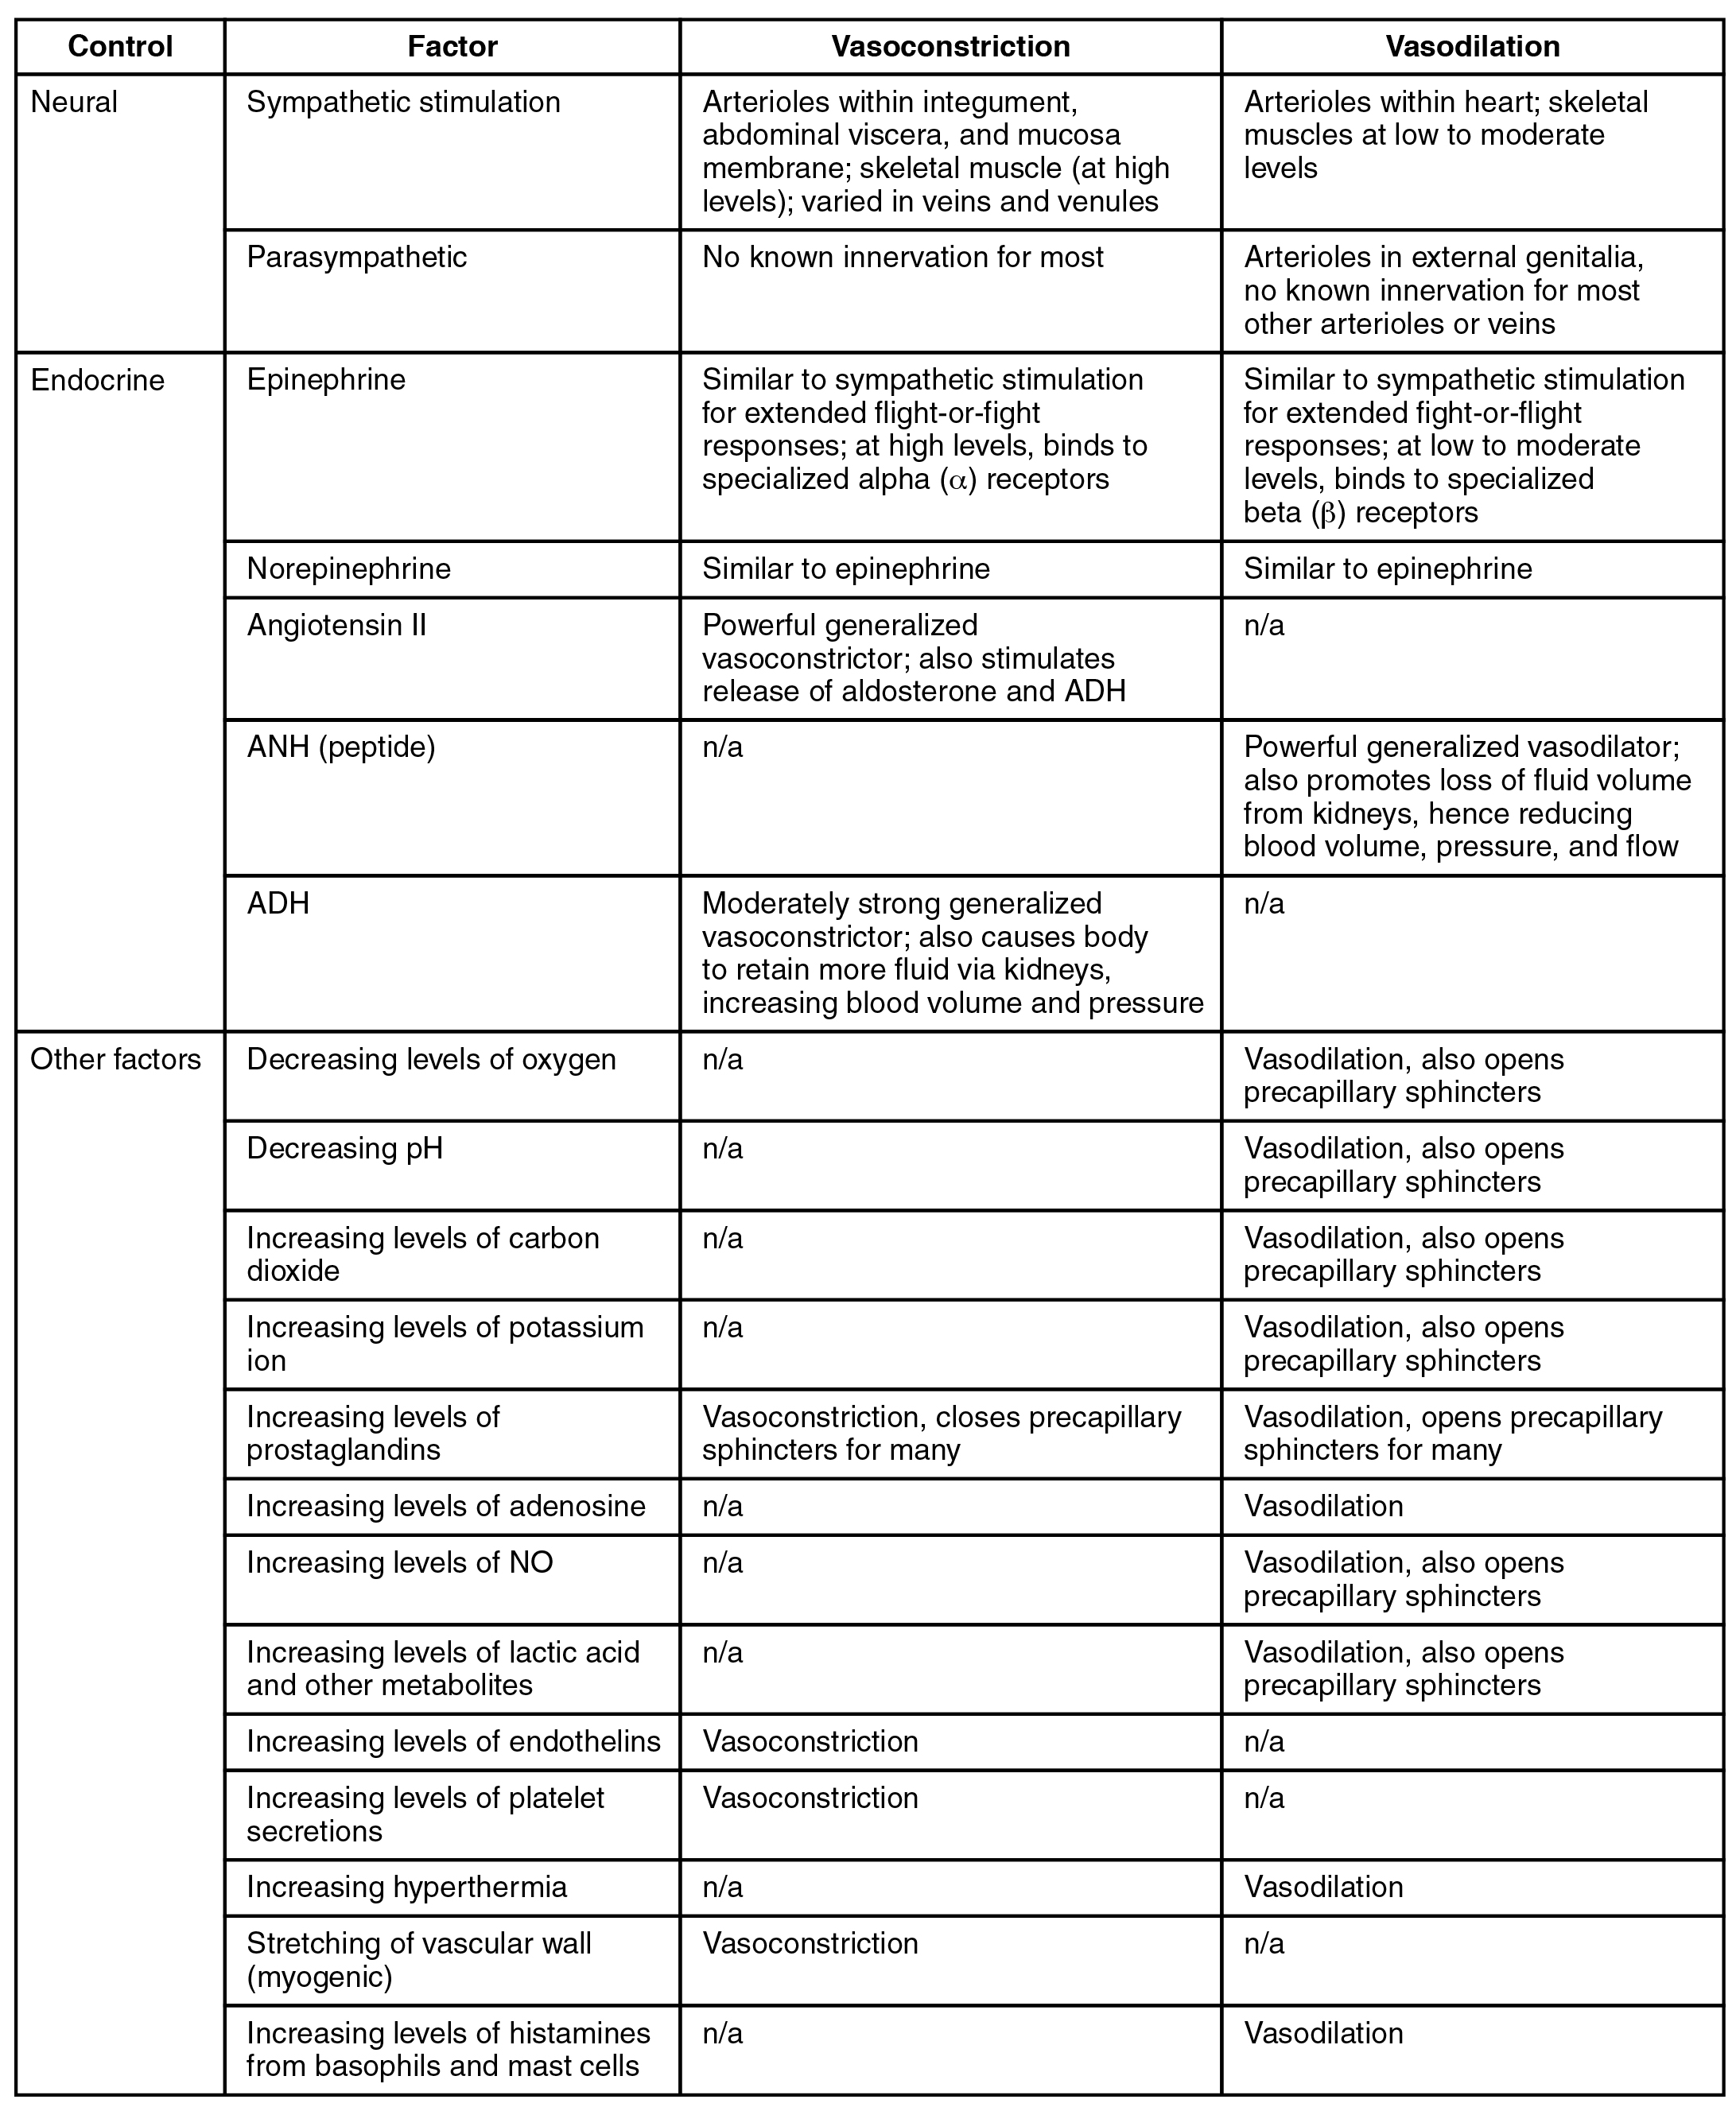 This table summarizes mechanisms that regulate arteriole smooth muscle and veins. Neural controls are regulated by sympathetic stimulation and parasympathetic. Endocrine controls are regulated by epinephrine, norepinephrine, angiotensin II, ANH (peptide), and ADH. Other factors include decreasing levels of oxygen, decreasing pH, increasing levels of carbon dioxide, increasing levels of potassium ion, increasing levels of prostaglandins, increasing levels of andenosine, increasing levels of NO, increasing levels of lactic acid and other metabolites, increasing levels of endothelins, increasing levels of platelet secretions, increasing hyperhtermia, stretching of vascular wall (myogenic), and increasing levels of histamines from basophils and mast cells.